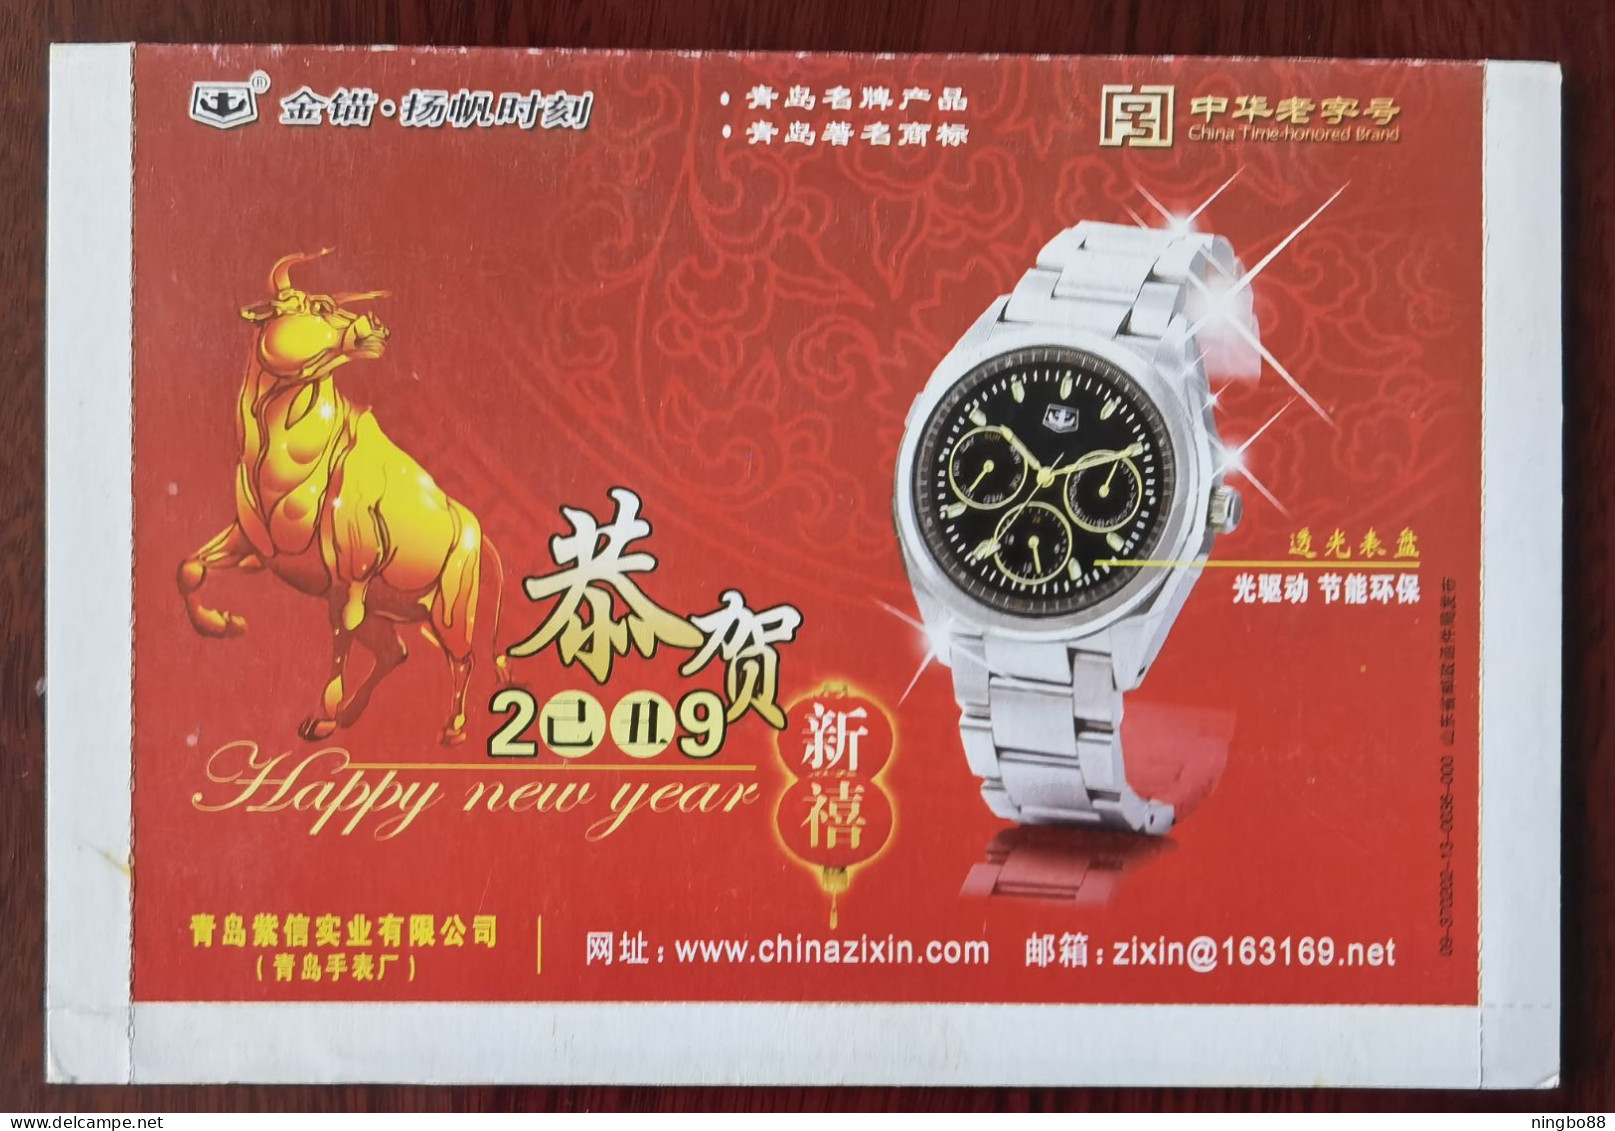 China Time-honored Brand Golden Anchor Photokinetic Energy Watch,China 2009 Qingdao Watch Factory Advertising PSL - Uhrmacherei